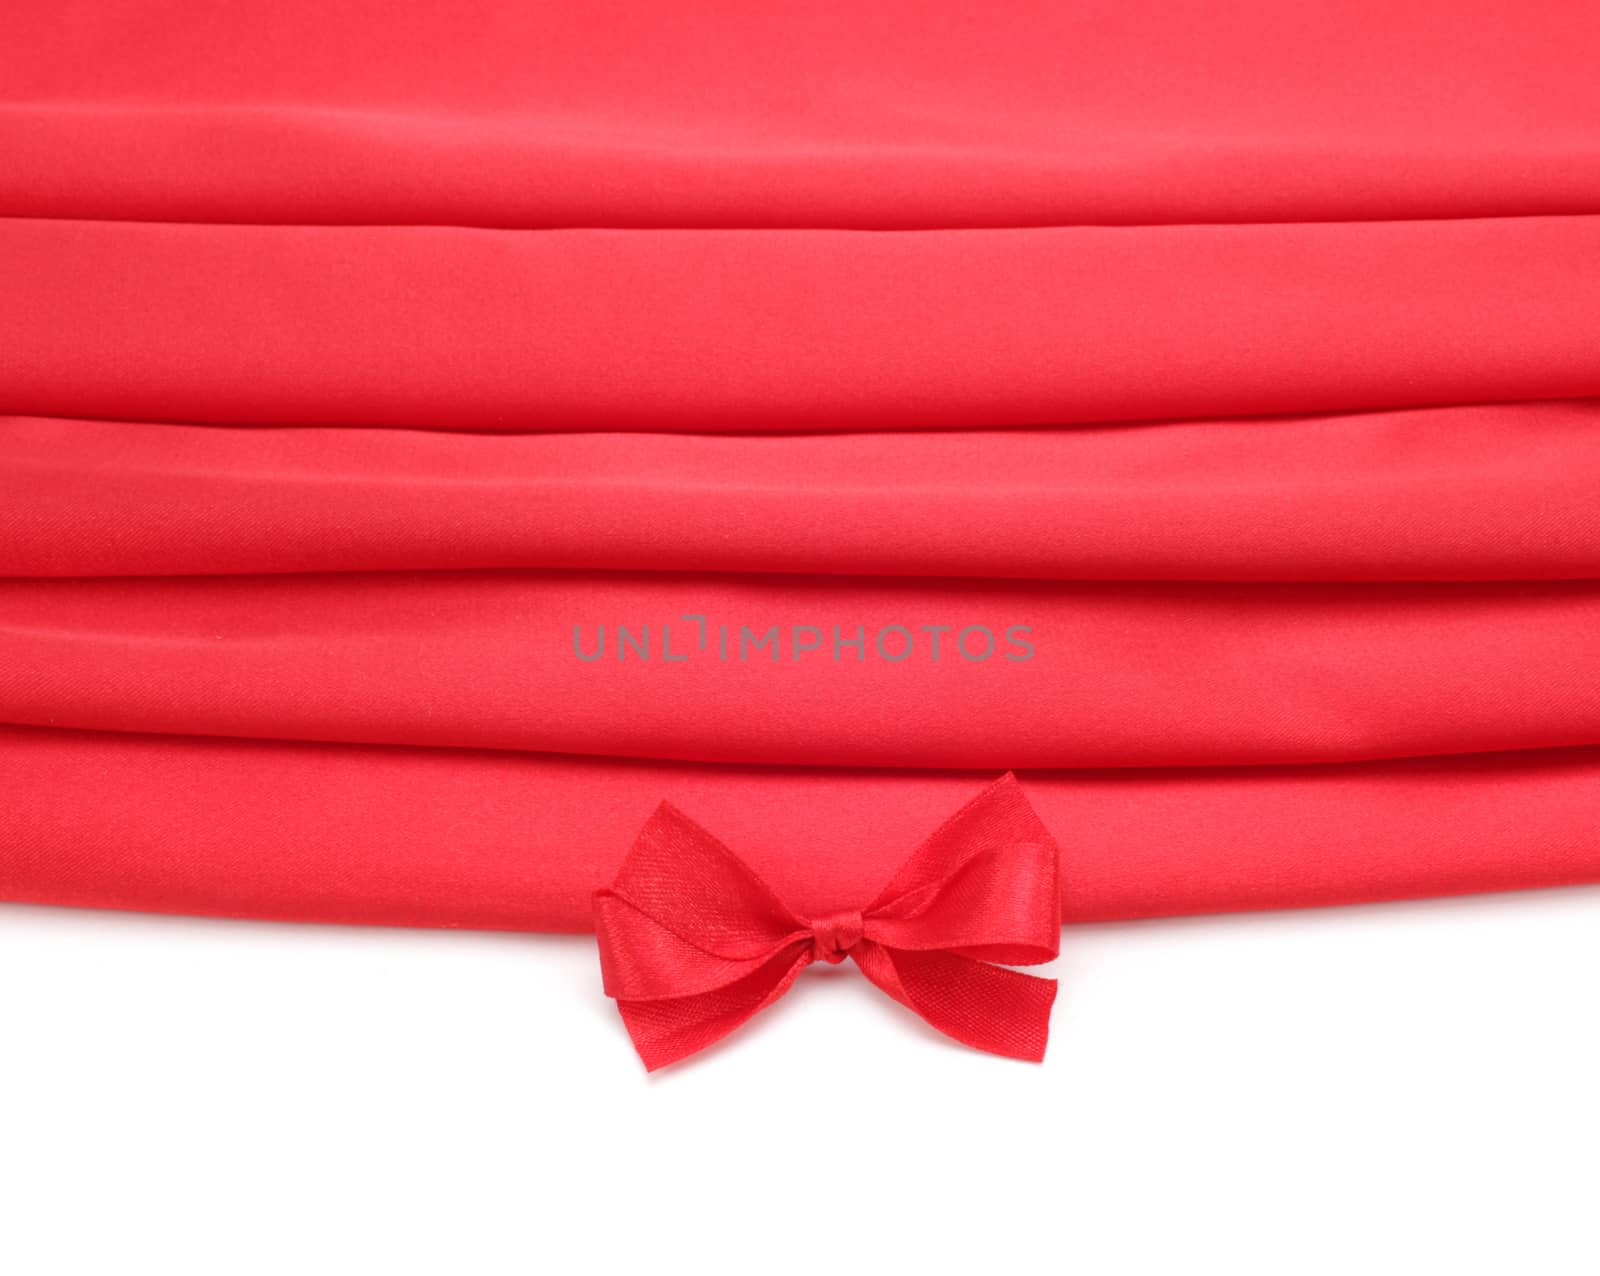 red silk fabric with bow